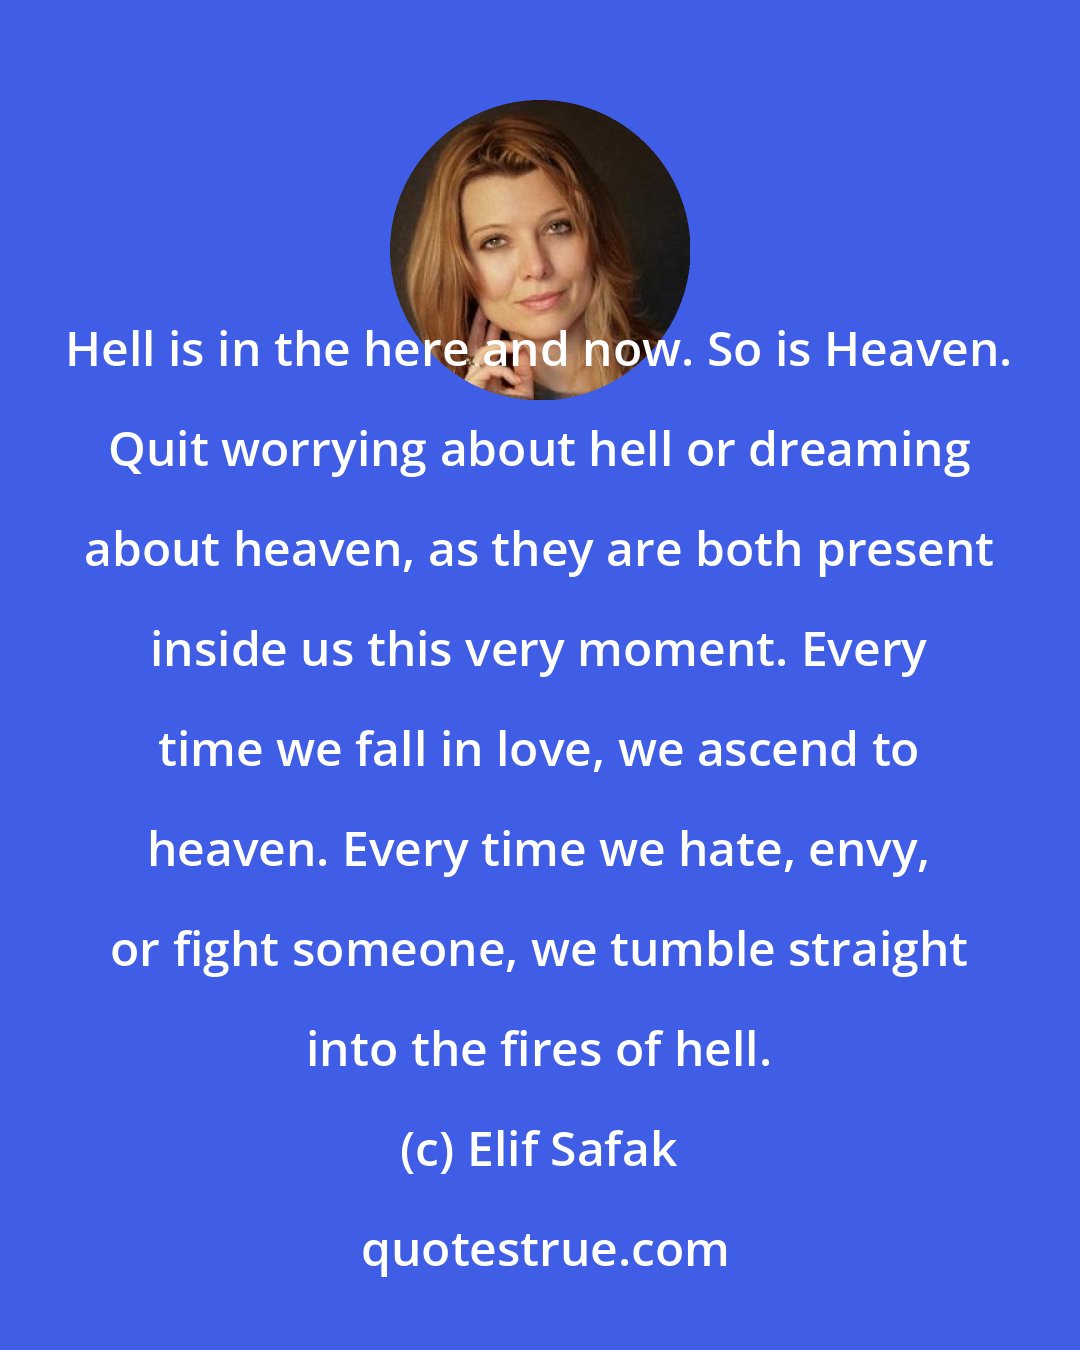 Elif Safak: Hell is in the here and now. So is Heaven. Quit worrying about hell or dreaming about heaven, as they are both present inside us this very moment. Every time we fall in love, we ascend to heaven. Every time we hate, envy, or fight someone, we tumble straight into the fires of hell.